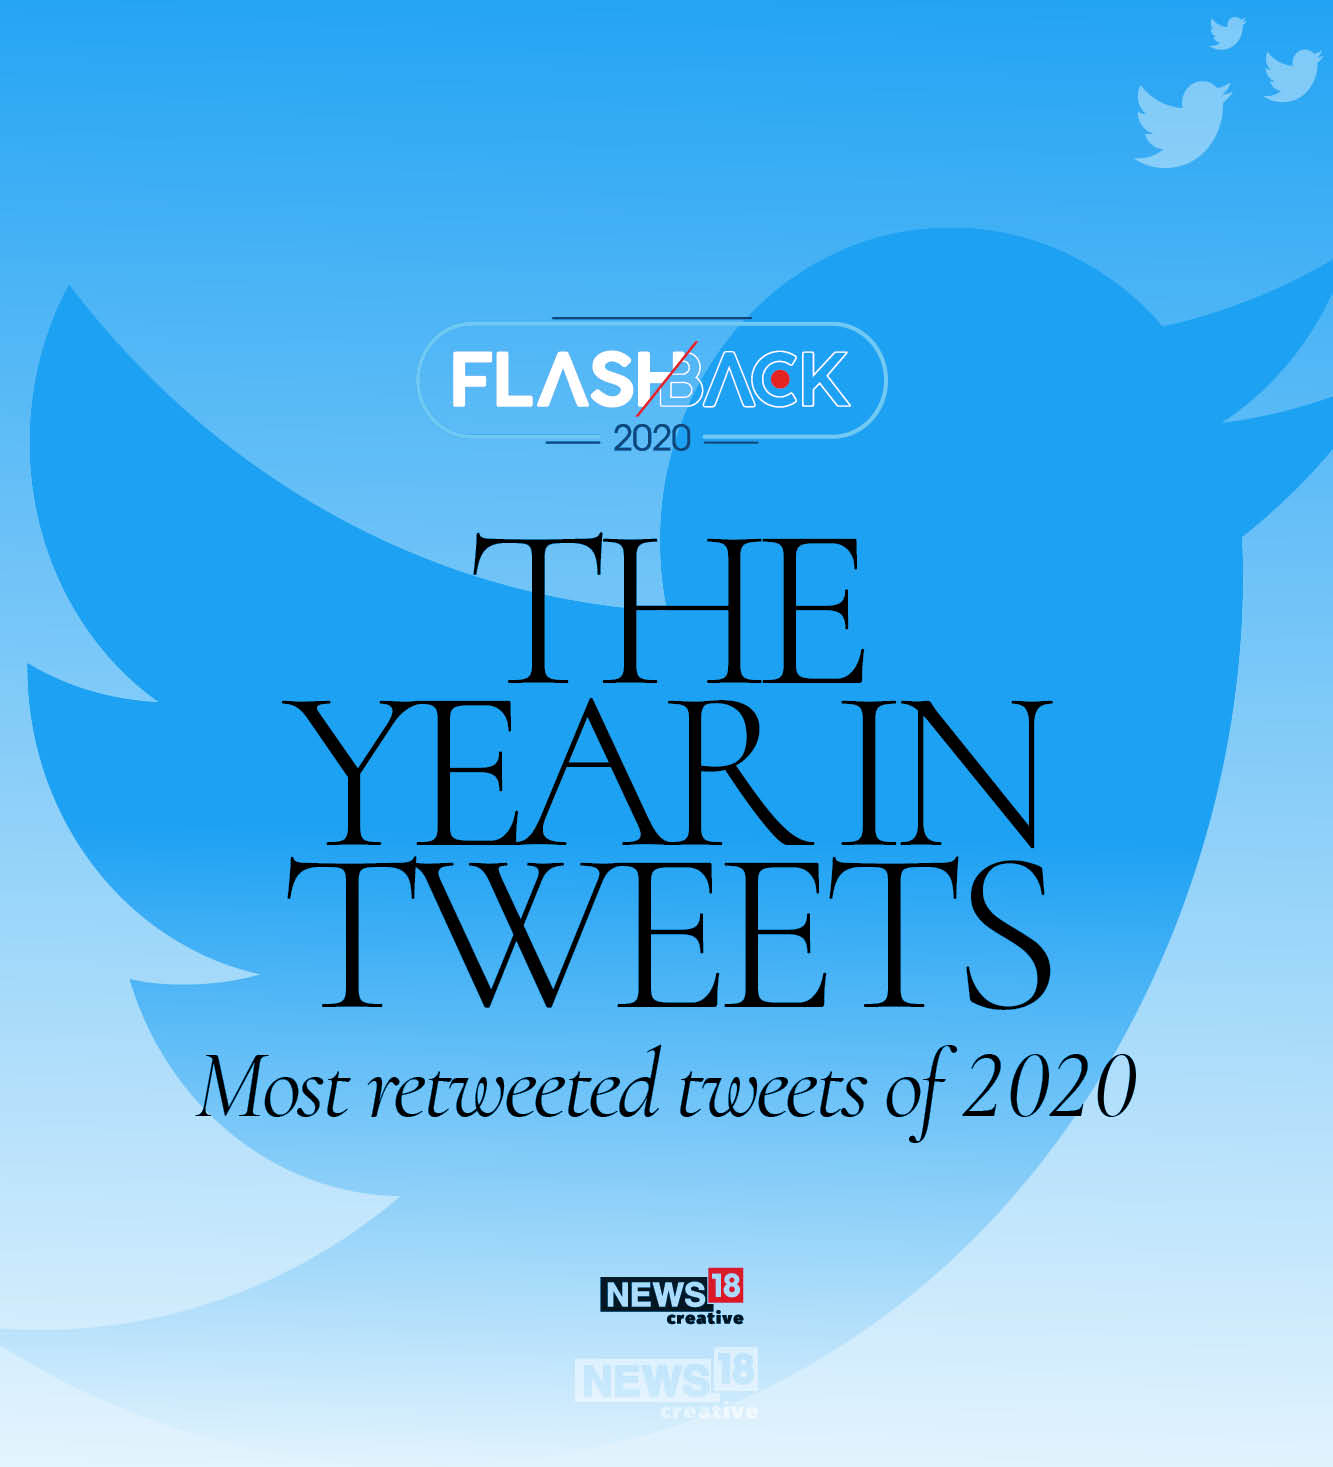 The most retweeted, liked and quoted tweets of 2020 are...